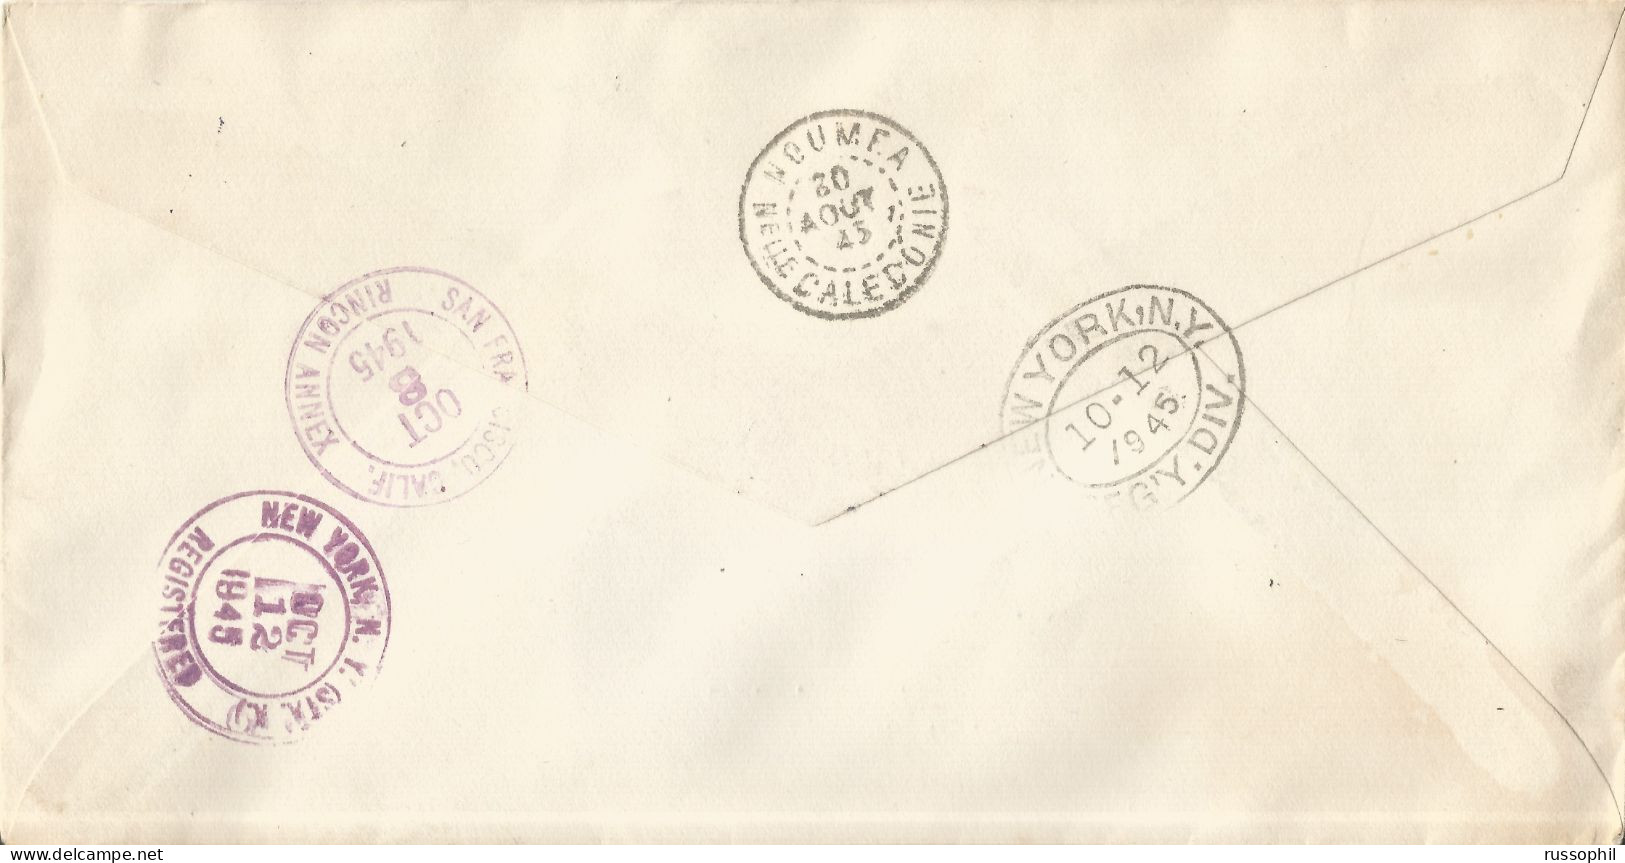 WALLIS AND FUTUNA - 7 STAMP 26 FR FRANKING "LONDON" ISSUE ON REGISTERED COVER TO THE USA - 1945 - Cartas & Documentos